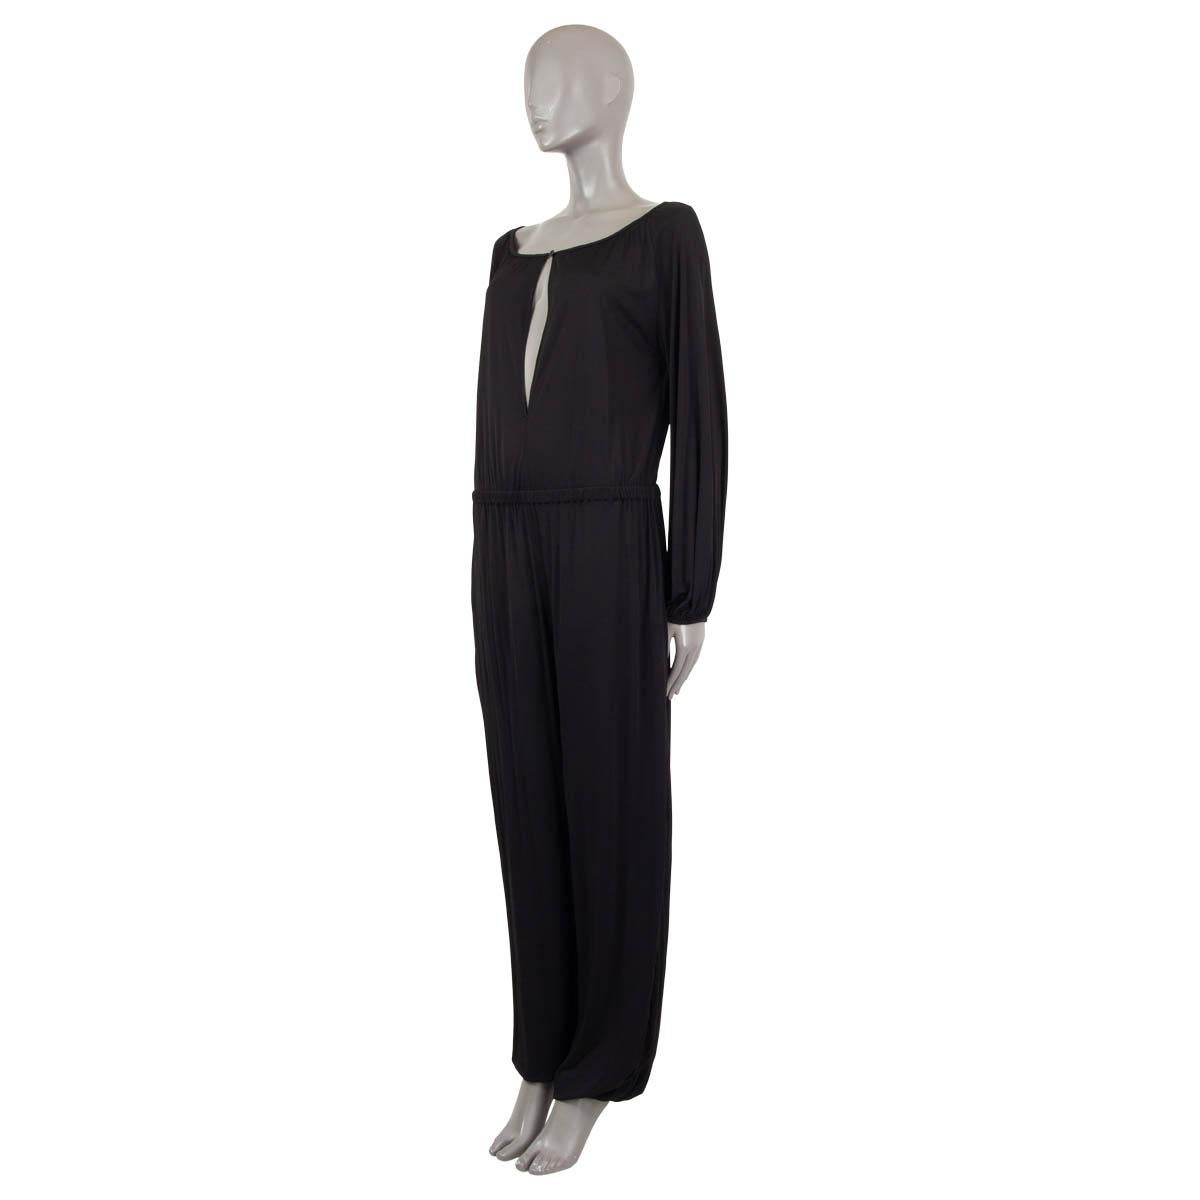 100% authentic Christian Dior keyhole jumpsuit in black viscose (100% - please note the content tag is missing). Features an elastic waist and cuffs. Closes with a button on the neck. Unlined. Has been worn and is in excellent condition.

2019